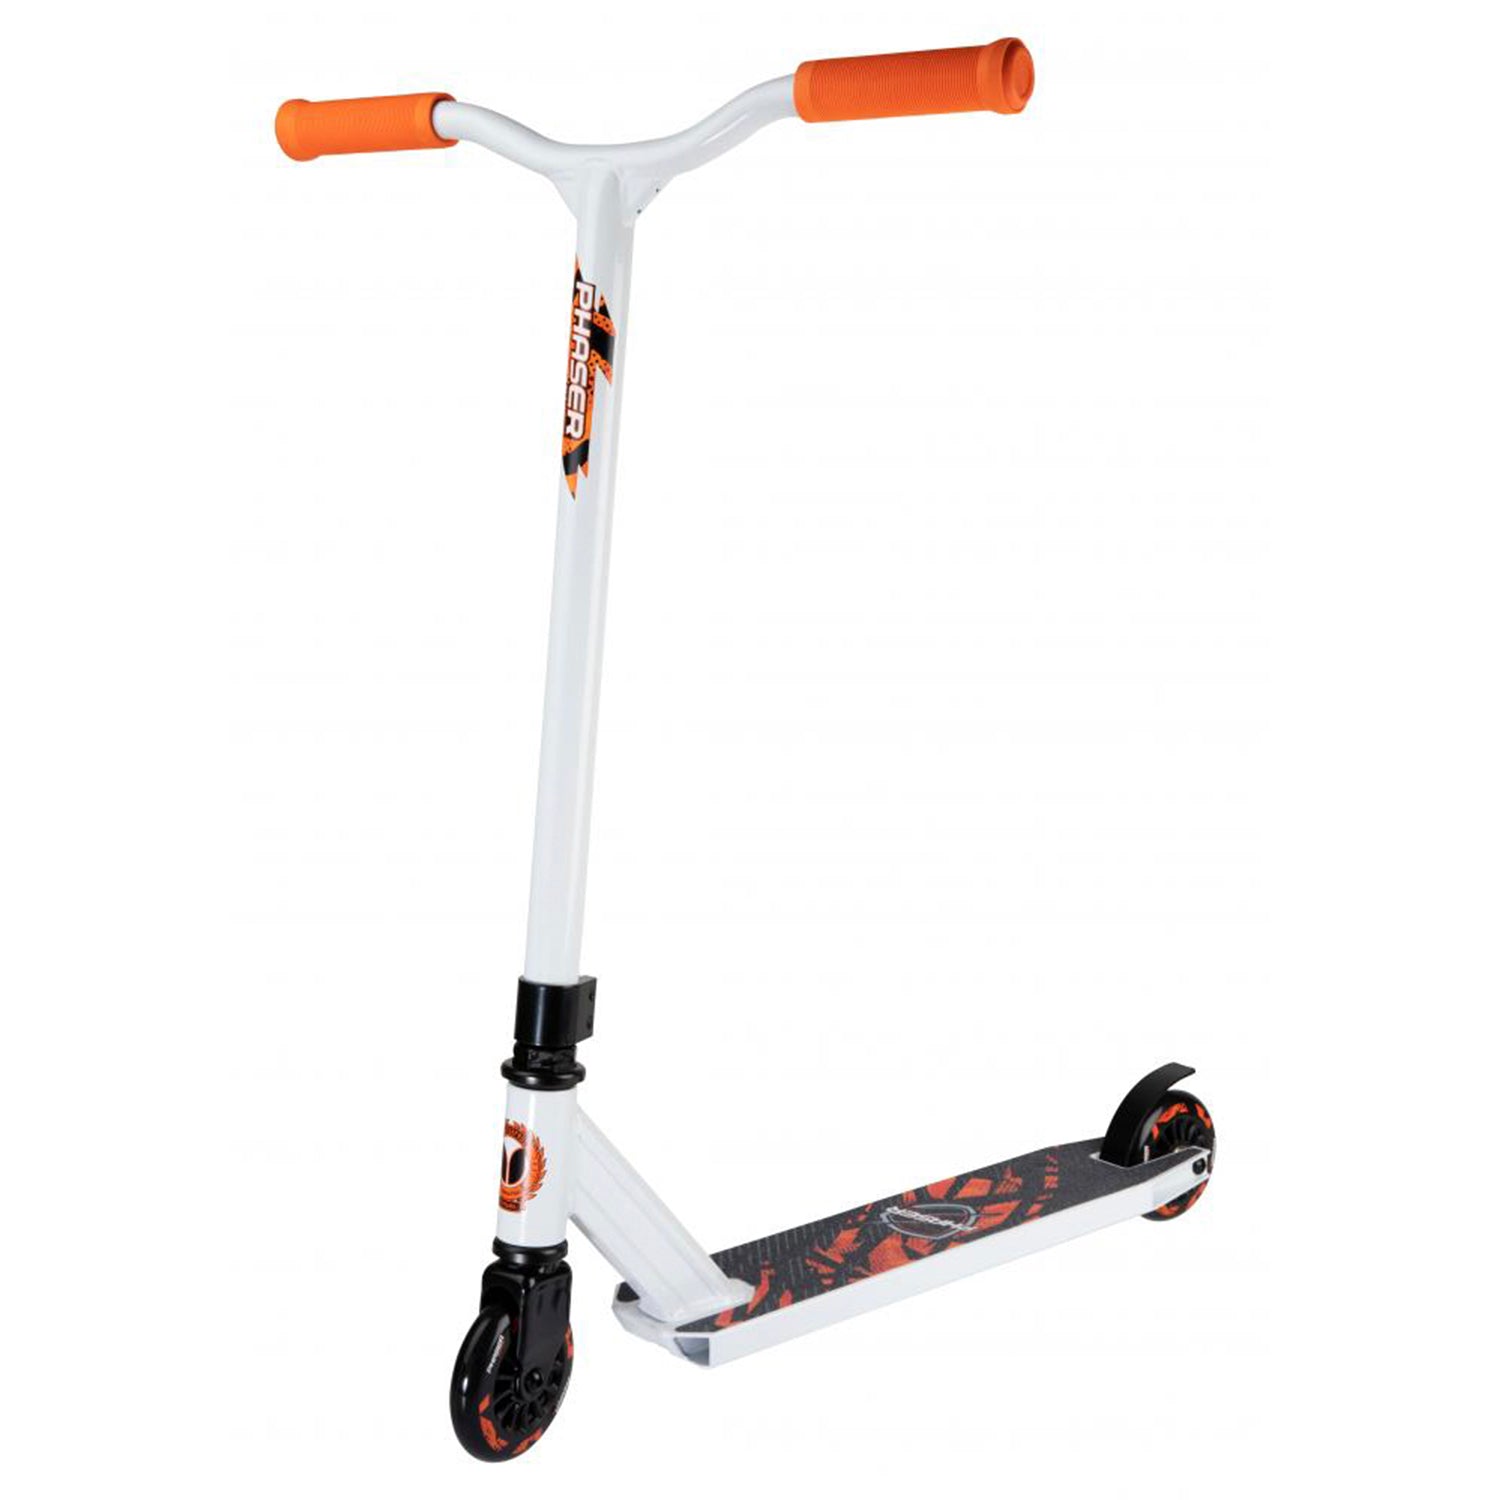 Blazer Pro Phaser 2 500mm Complete Scooter - White - Prime Delux Store